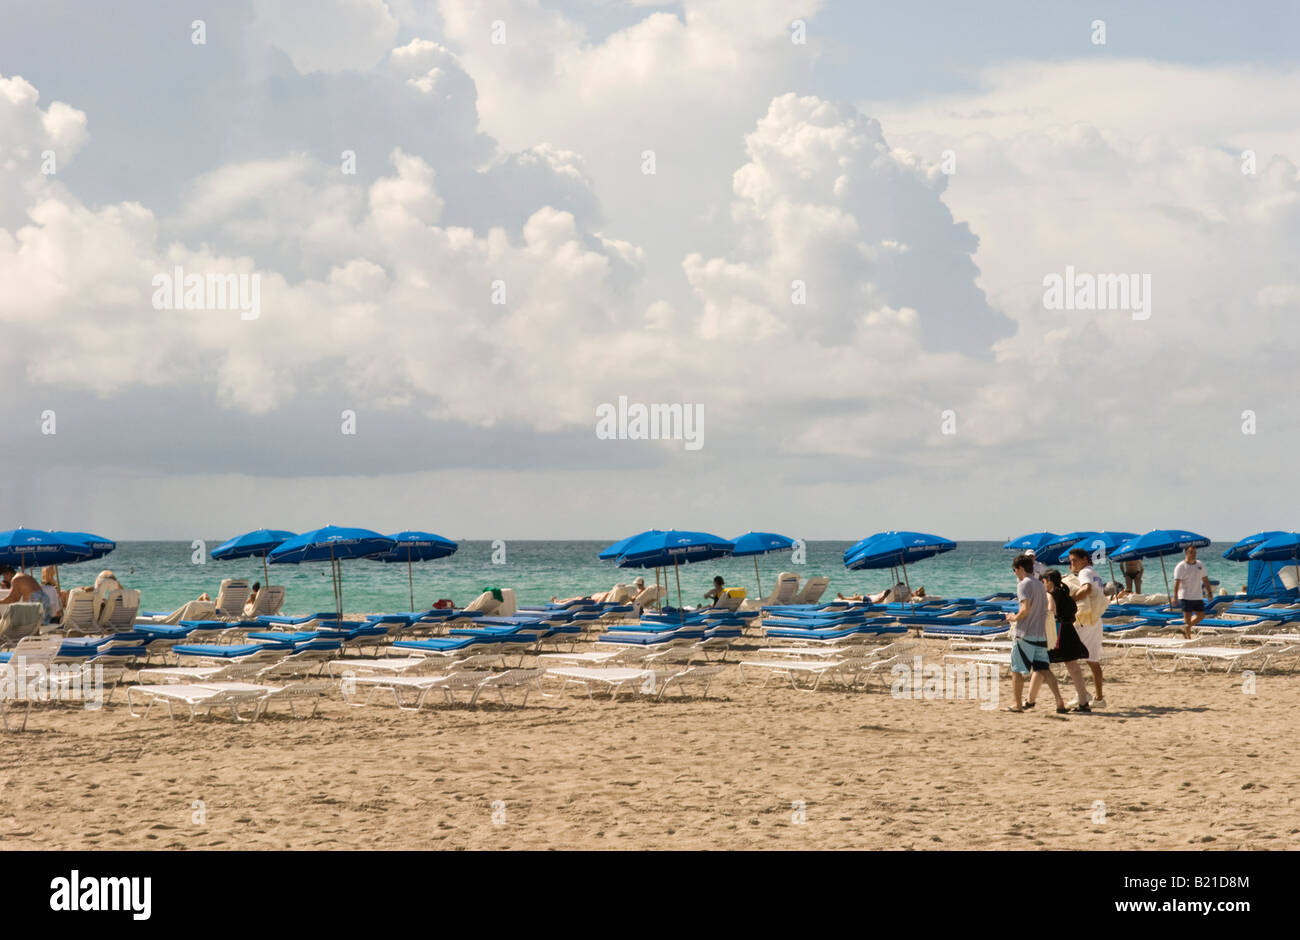 Lounge chairs lined up on Miami Beach in the morning Stock Photo